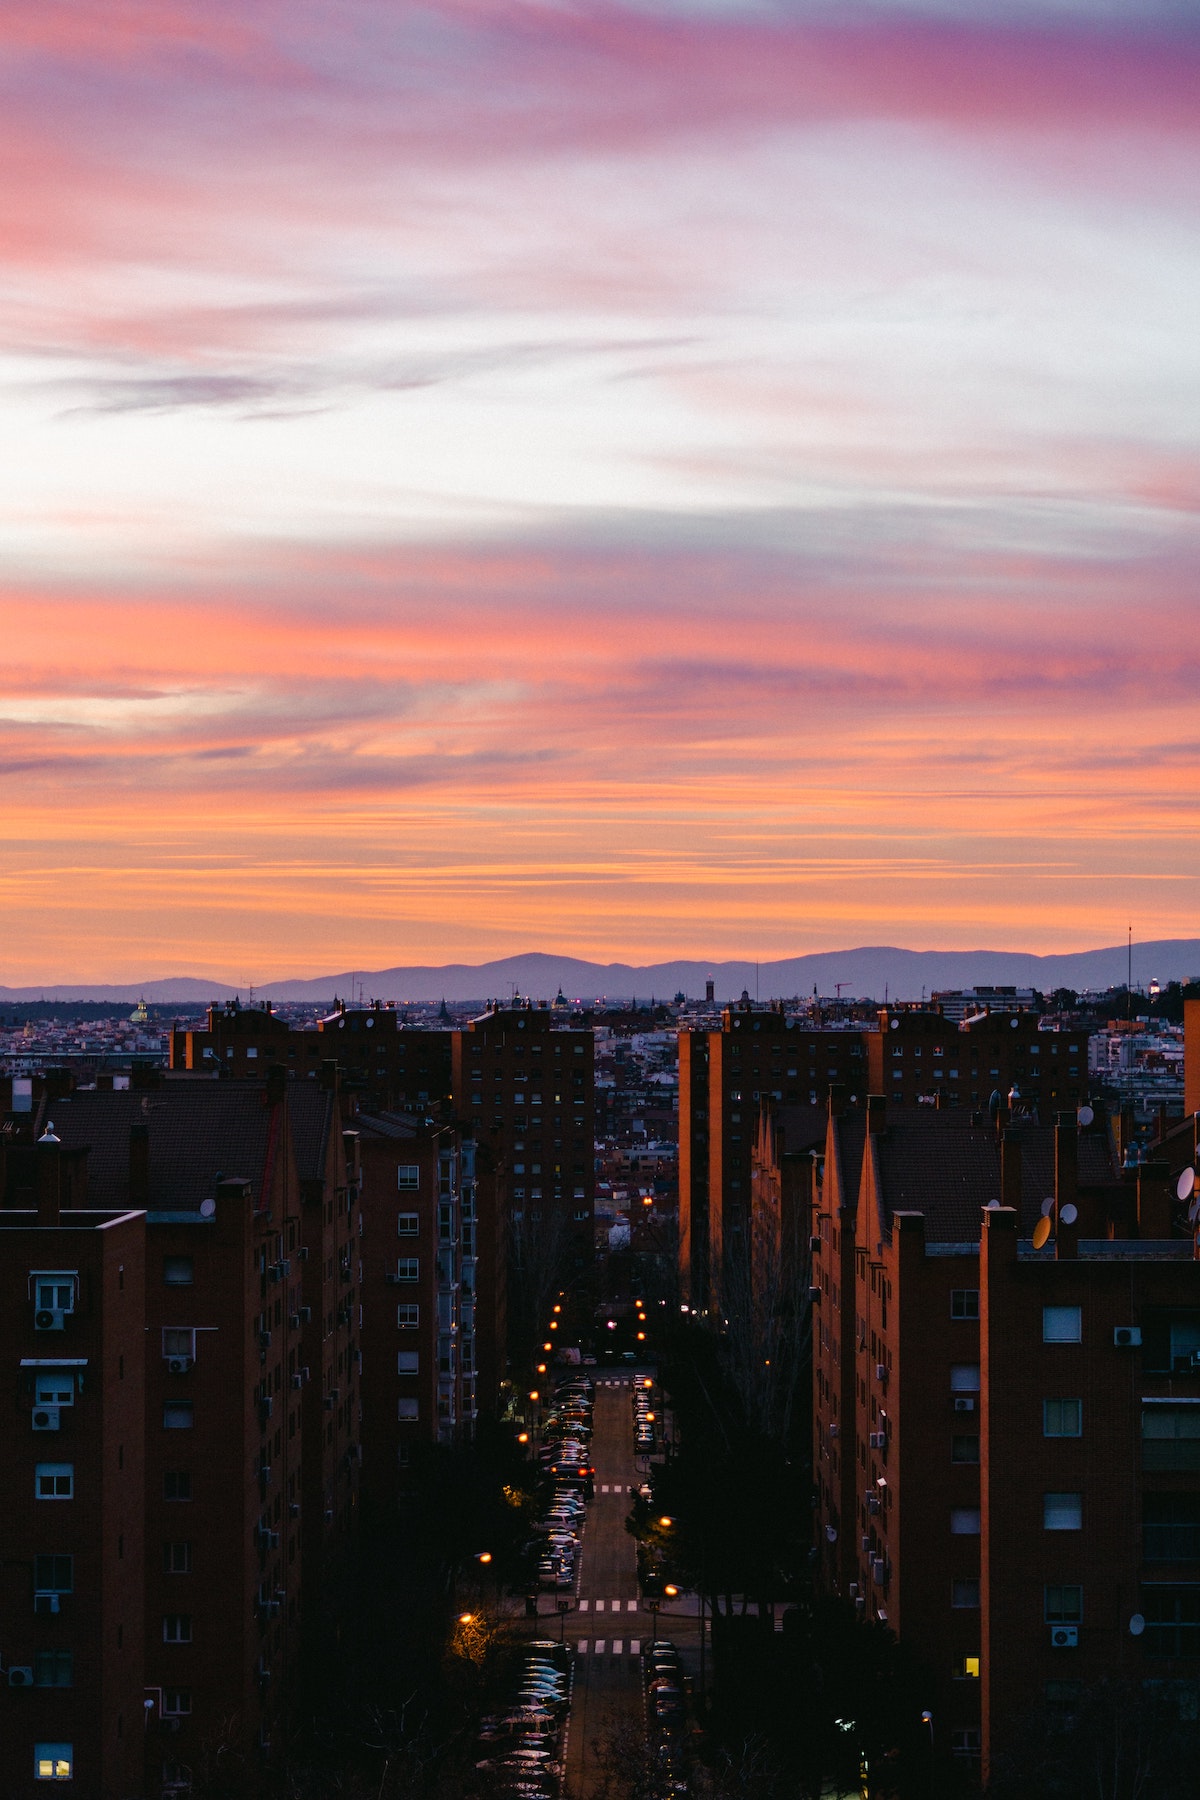 Sunset over a residential street in Madrid, Spain with mountains in the distance.